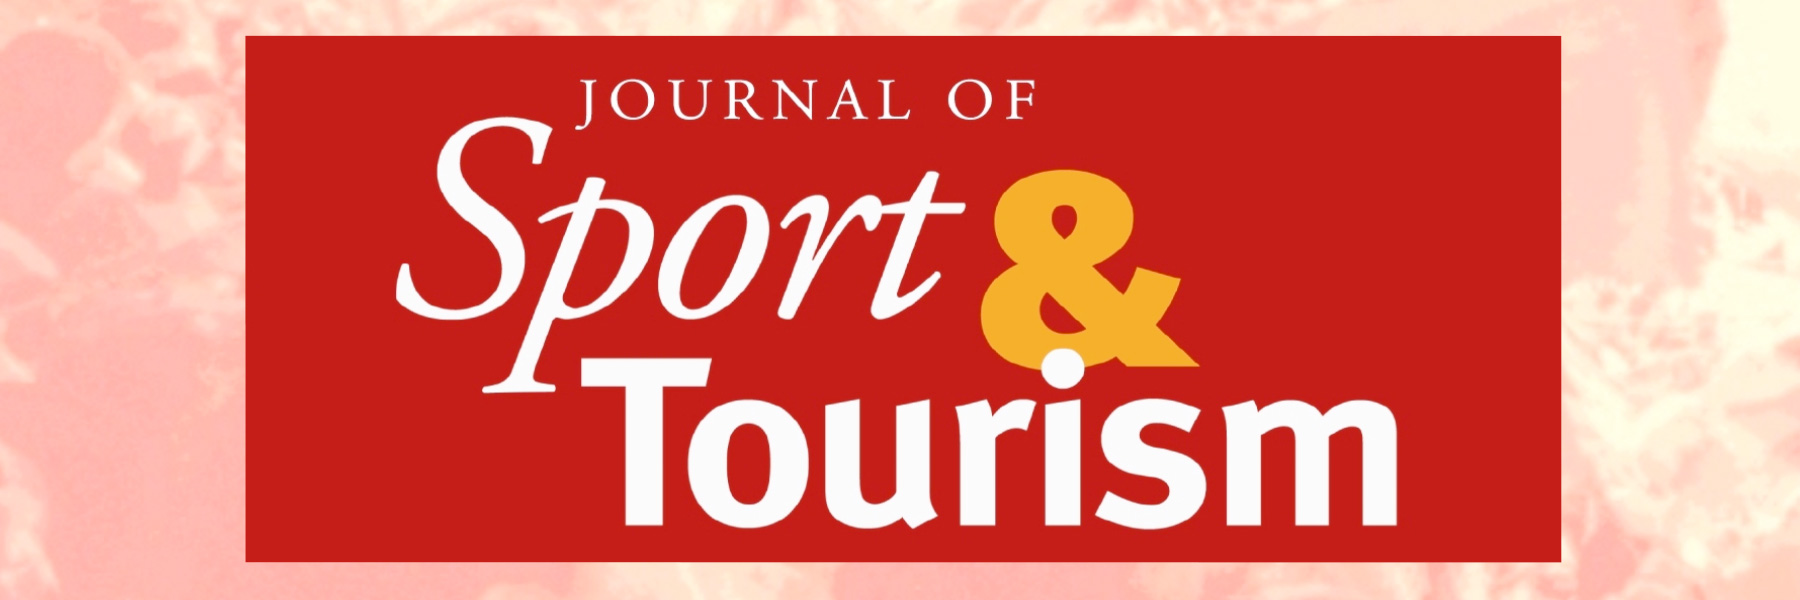 Systematic Review of Surf Tourism Research Literature 2022 | Professor Dr Steven A Martin | Journal of Sport & Tourism